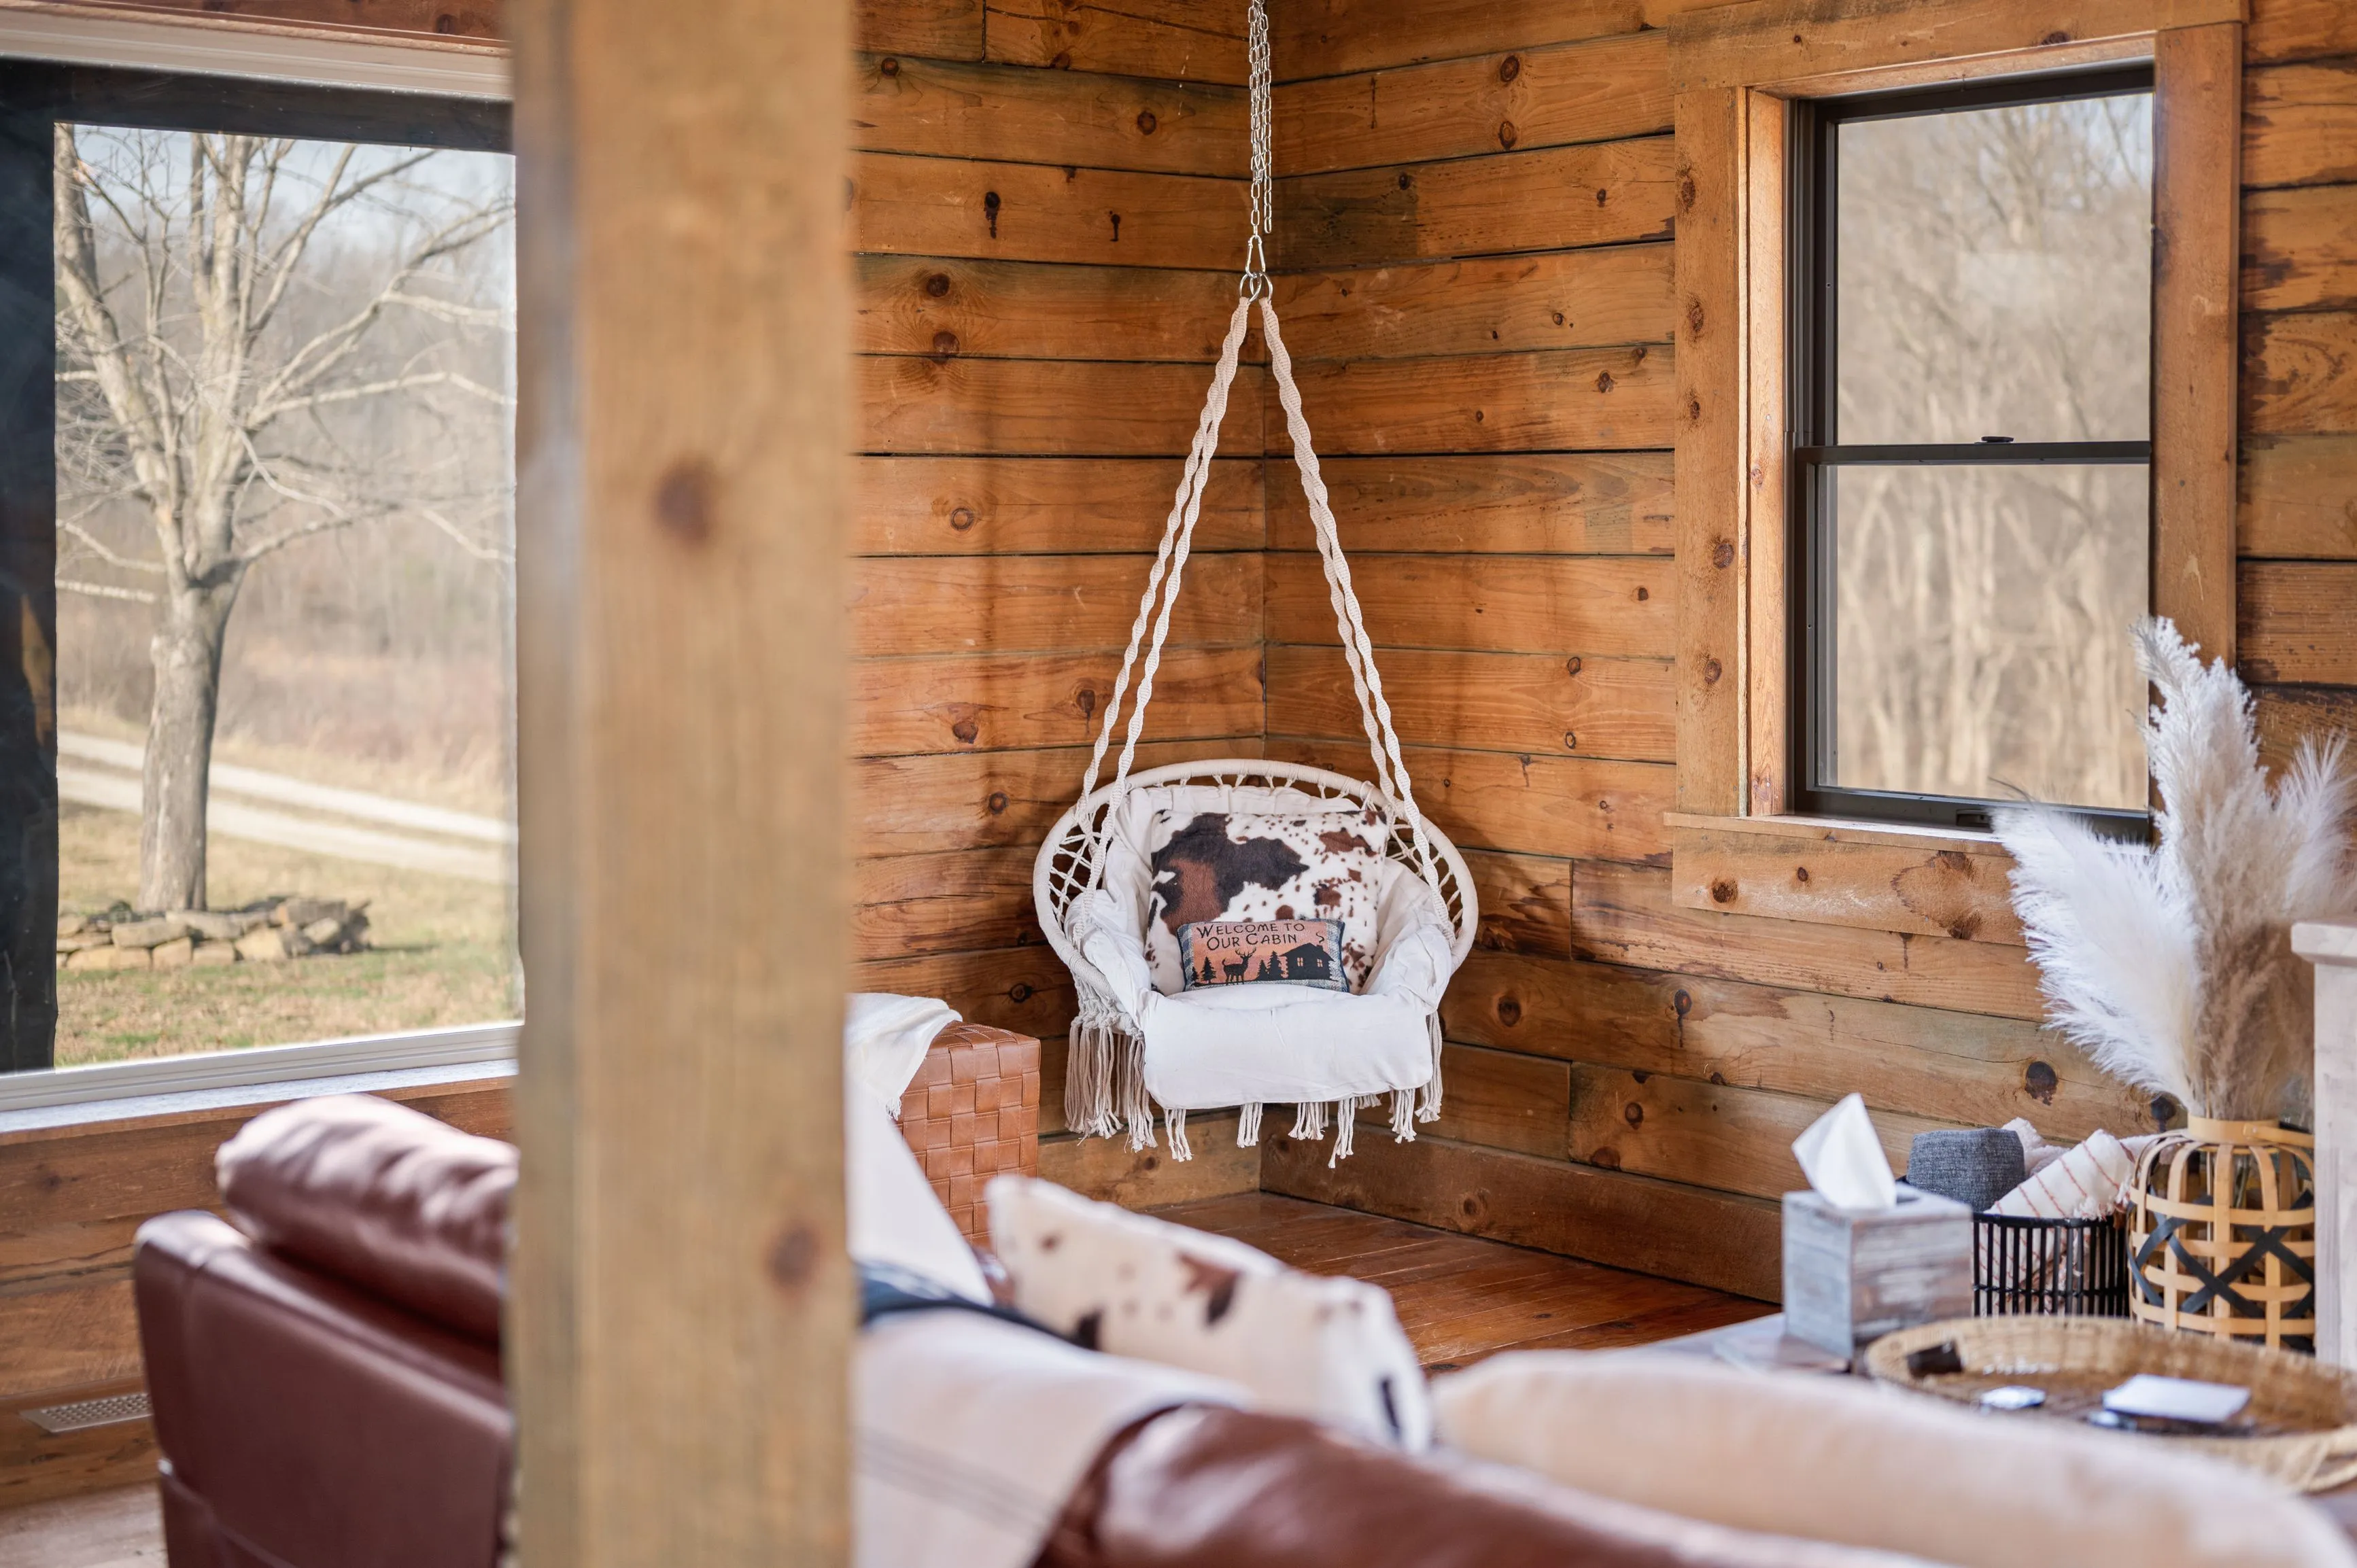 Cozy wooden cabin interior with hanging swing chair, plush cushions, and a view of outside trees through window.